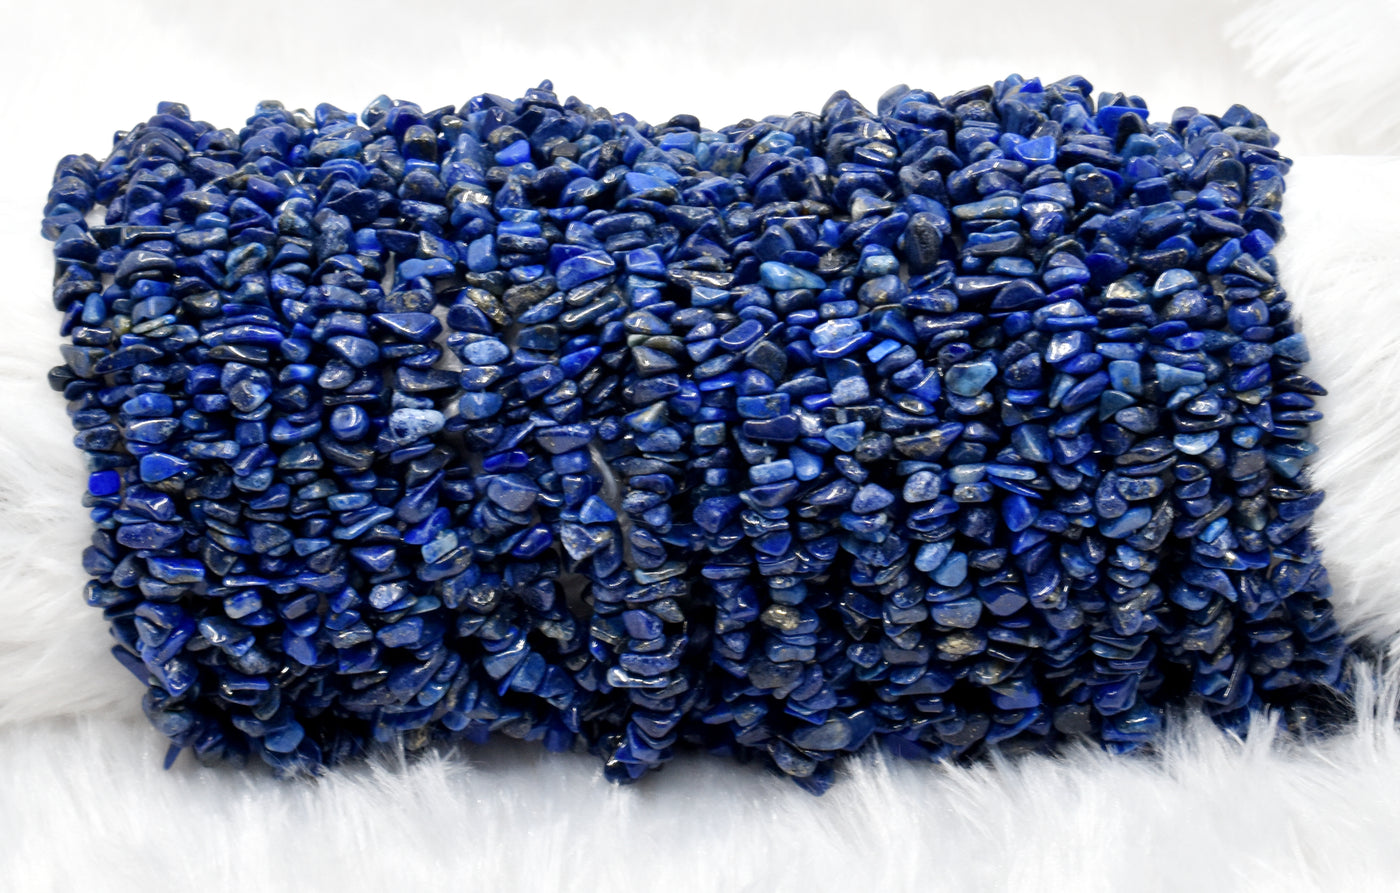 Uncut Raw Lapis Lazuli Crystal Chip Beads for Necklace (Expansion and Insight)